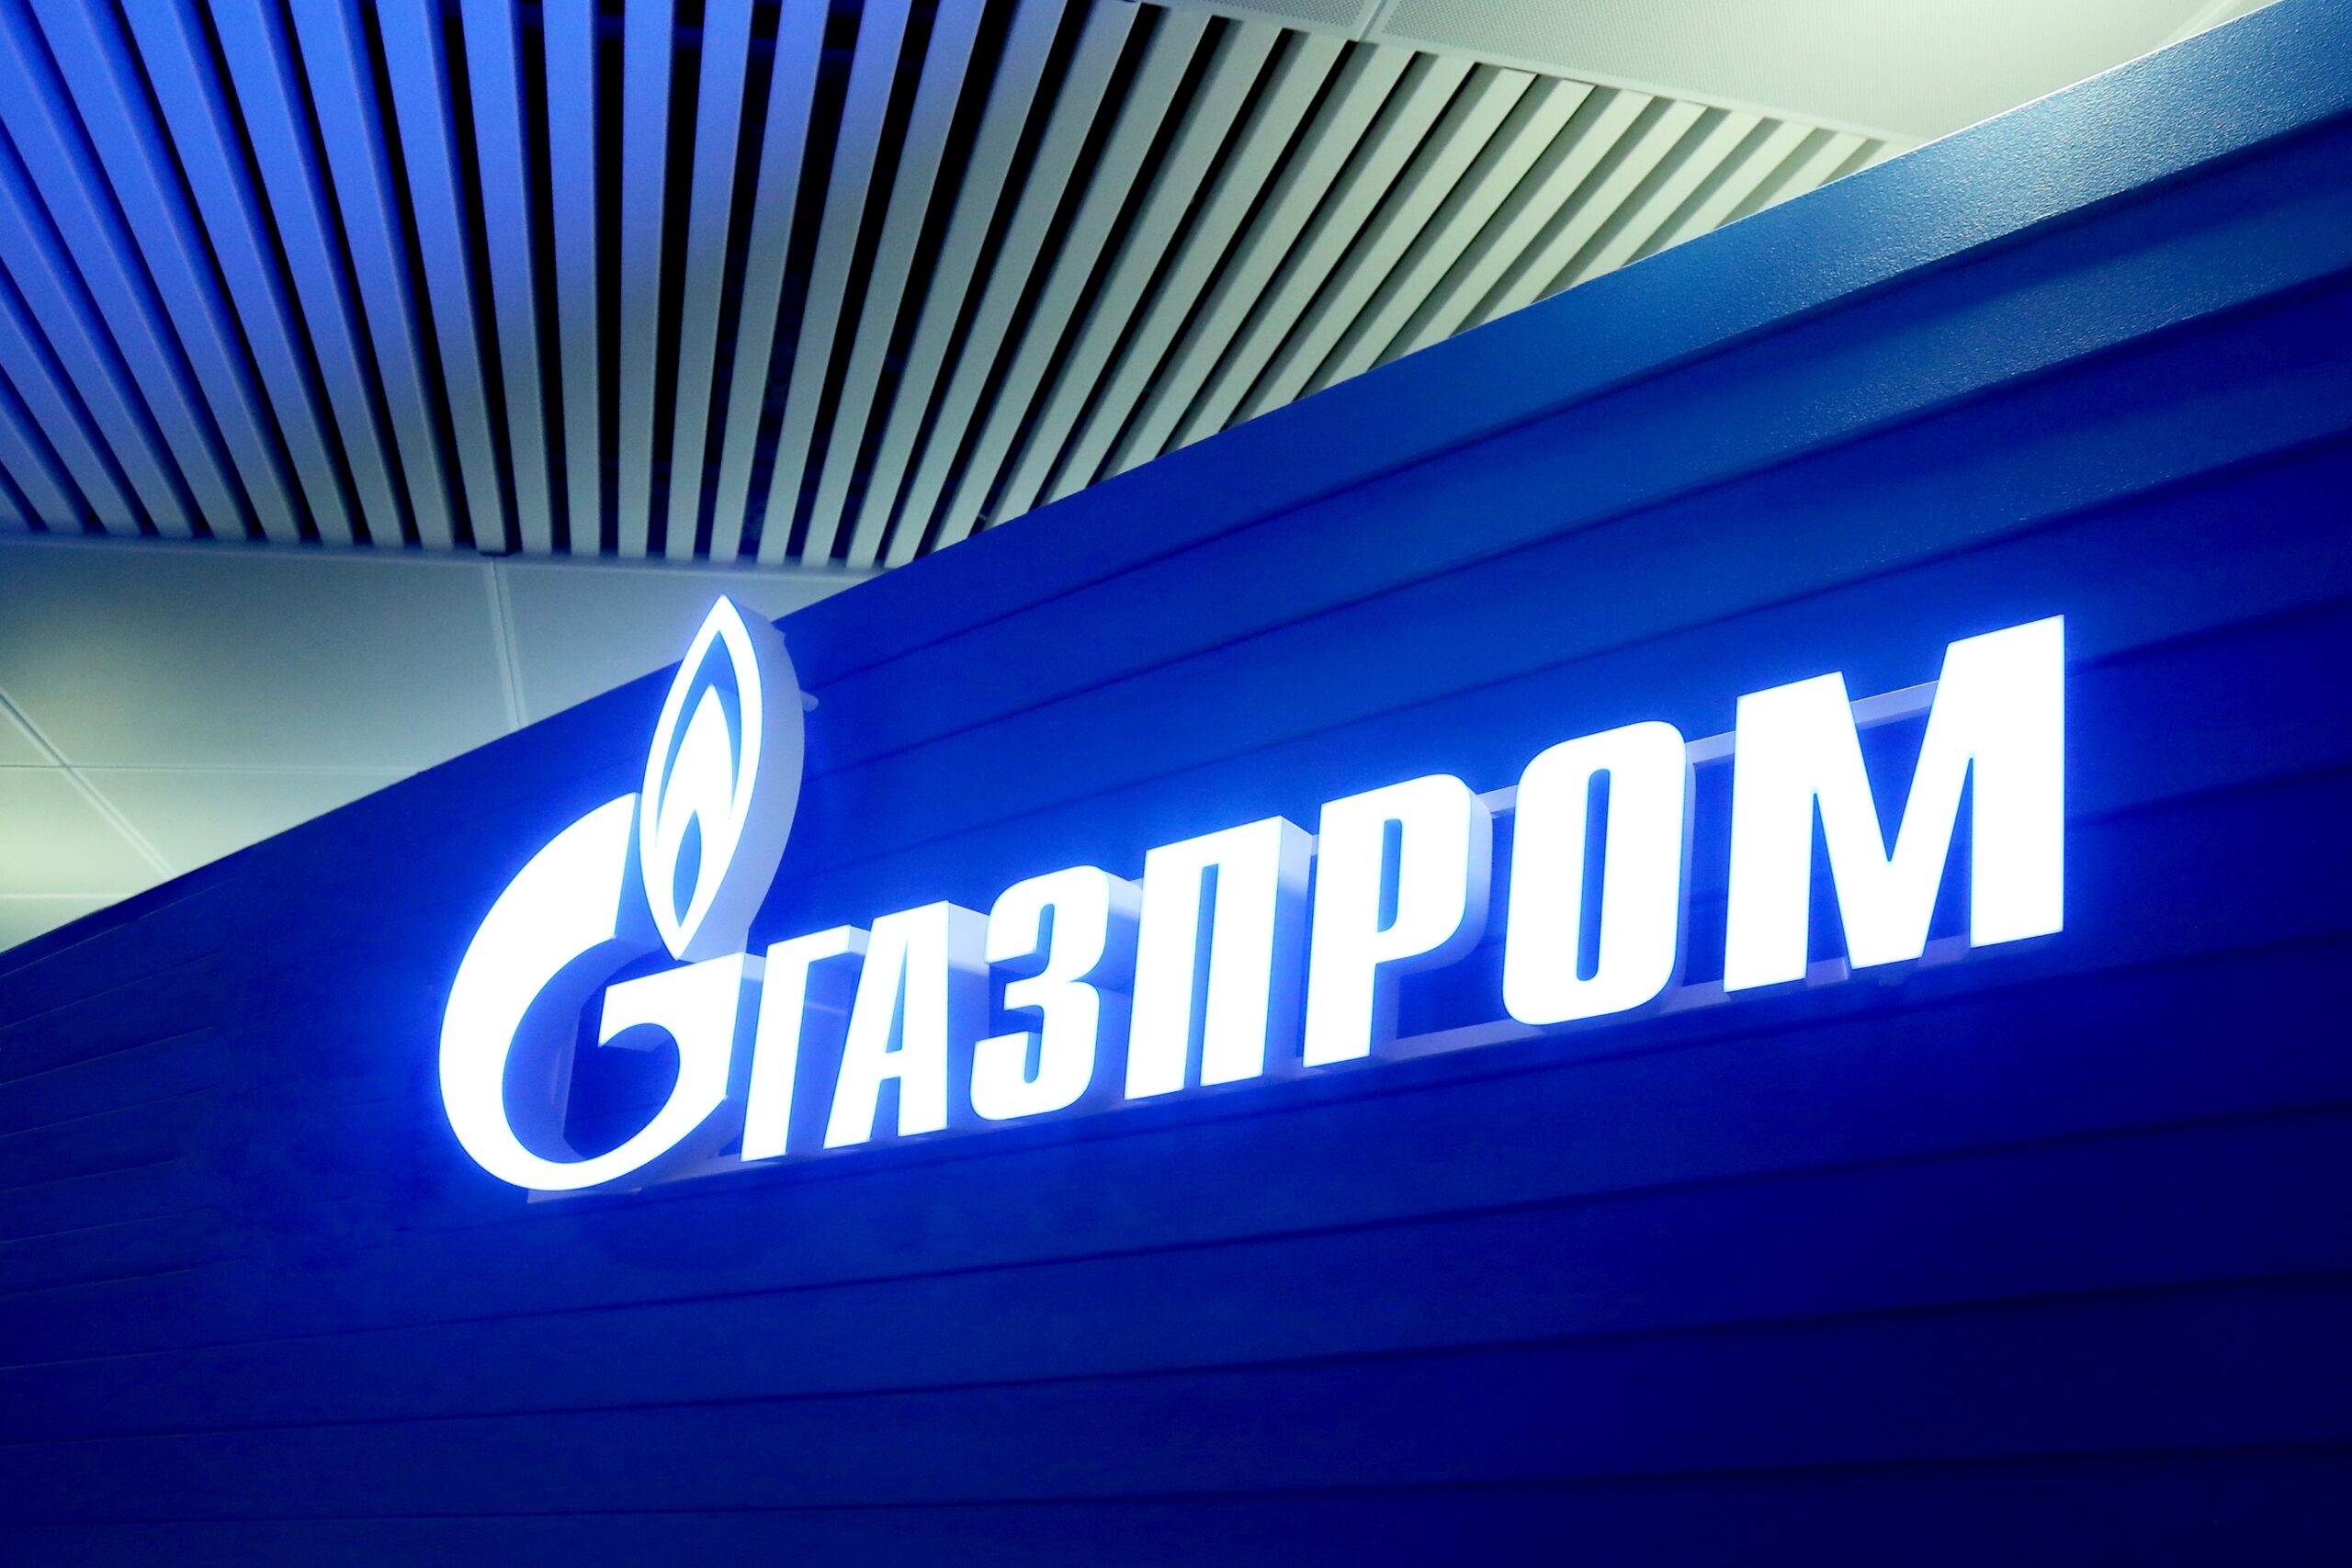 Management Committee proposes to hold annual General Shareholders Meeting of Gazprom via absentee voting